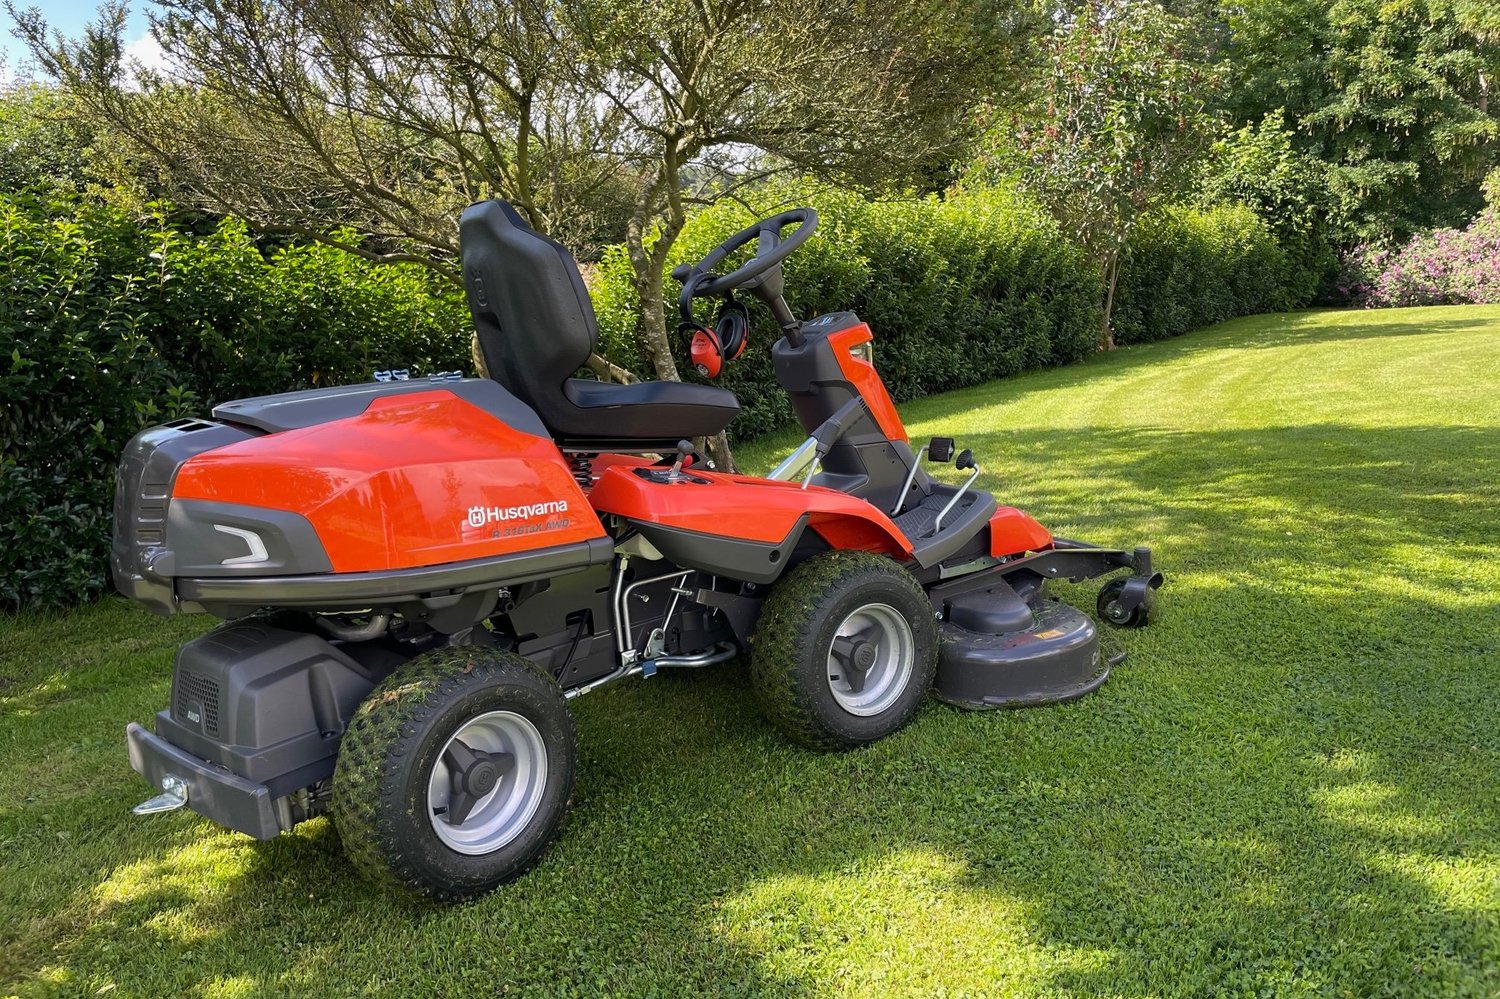 A Beginner’s Guide To Operating A Lawn Tractor Safely